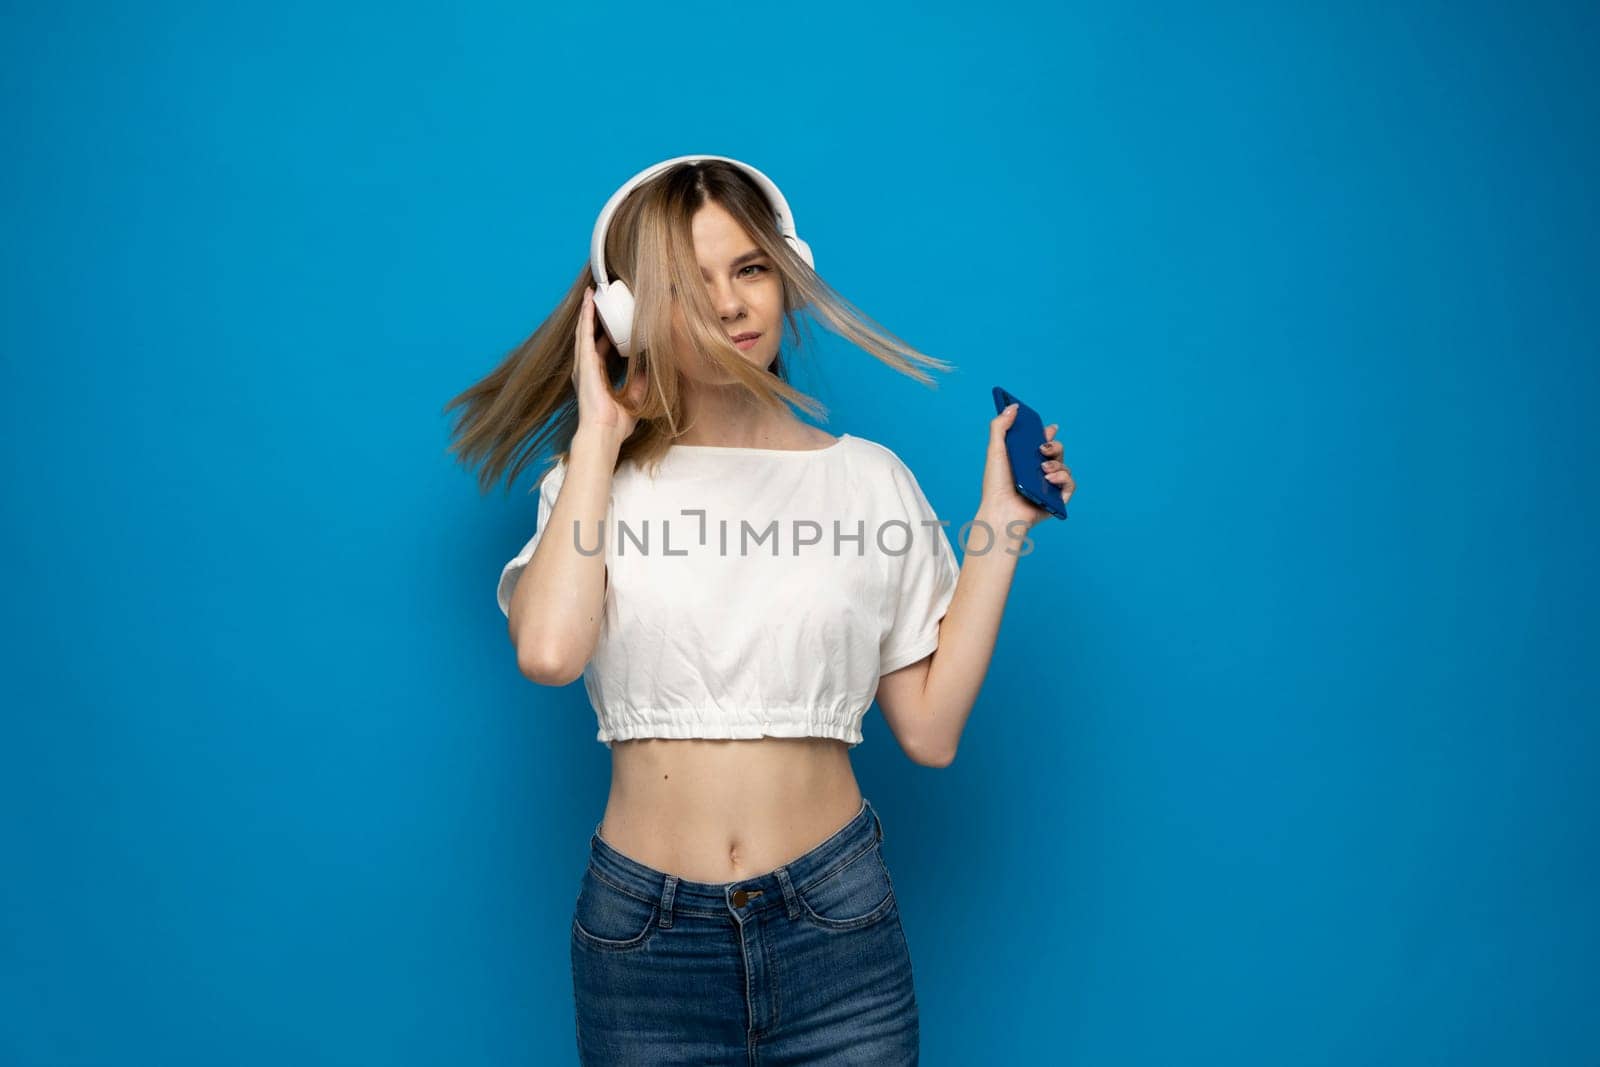 Beautiful young blonde woman with headphones and mobile device listening to music and smiling and dancing, isolated on blue background. by vovsht